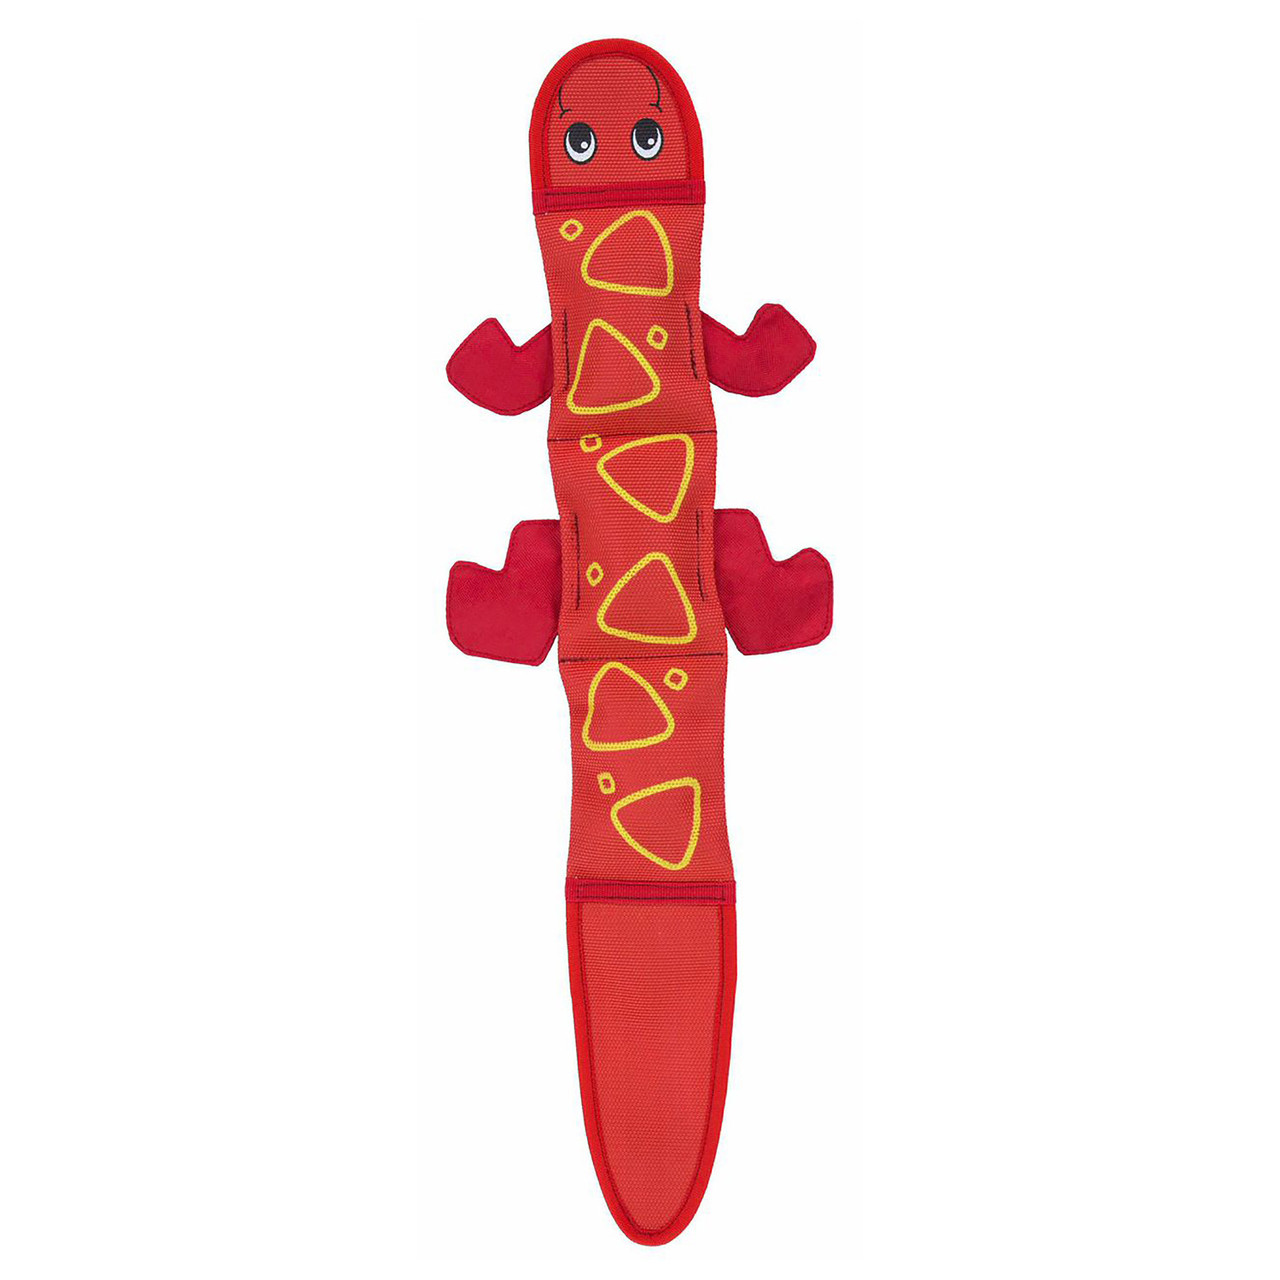 Outward Hound Invincibles Red & Orange Gecko Dog Toy, 2 Squeakers